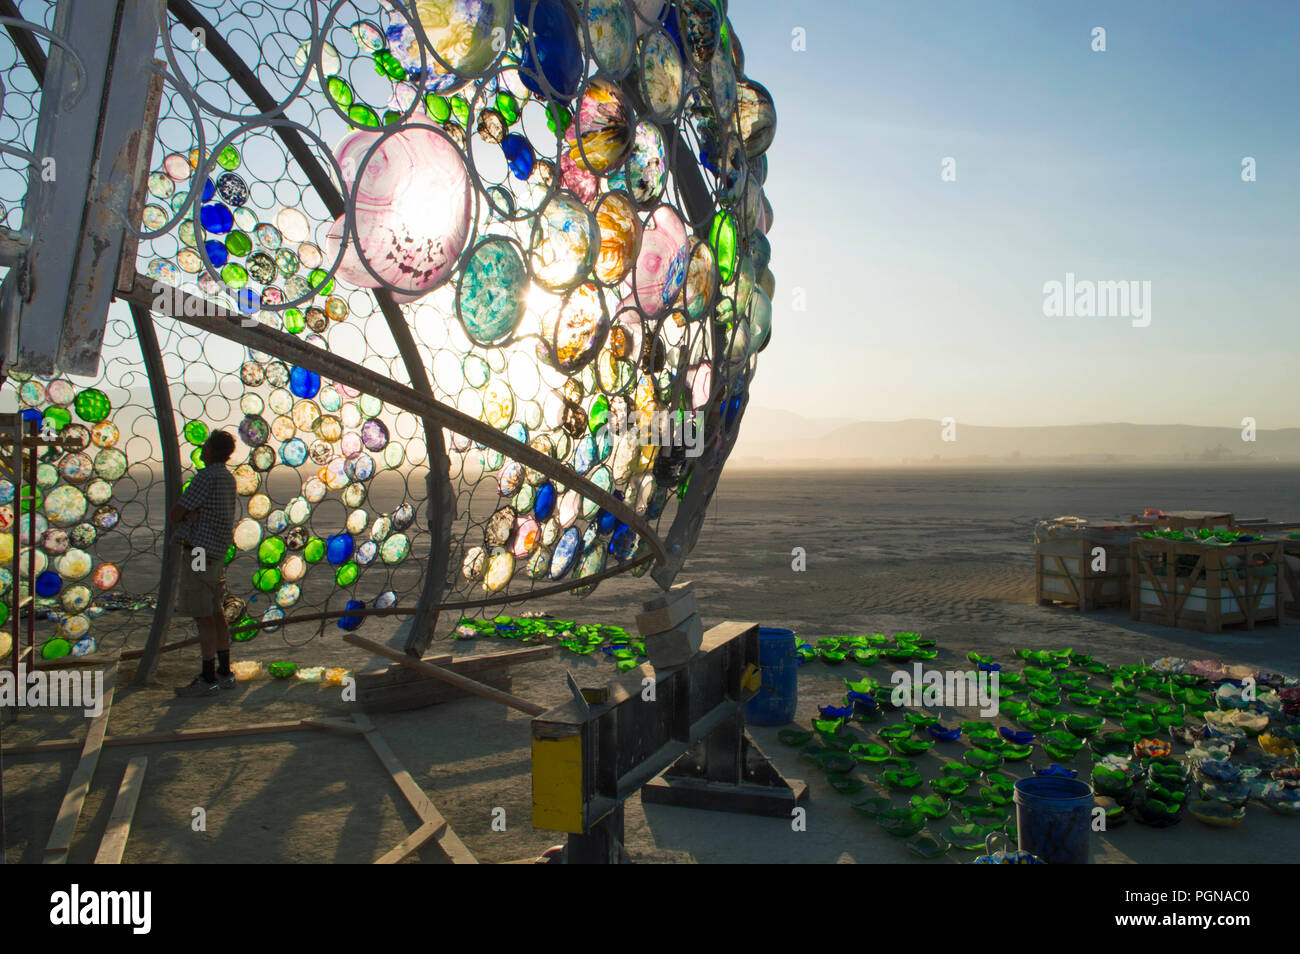 Workers assembly hundreds of hand made stained glass inserts that will eventually be illuminated by lights for the Jelly Fish Project at the Burning Man Festival as they prepare for attendees to the annual counter culture festival in the desert August 23, 2018 near Black Rock, Nevada. Each year 80,000 of people set up a temporary art city in the middle of the desert. Stock Photo